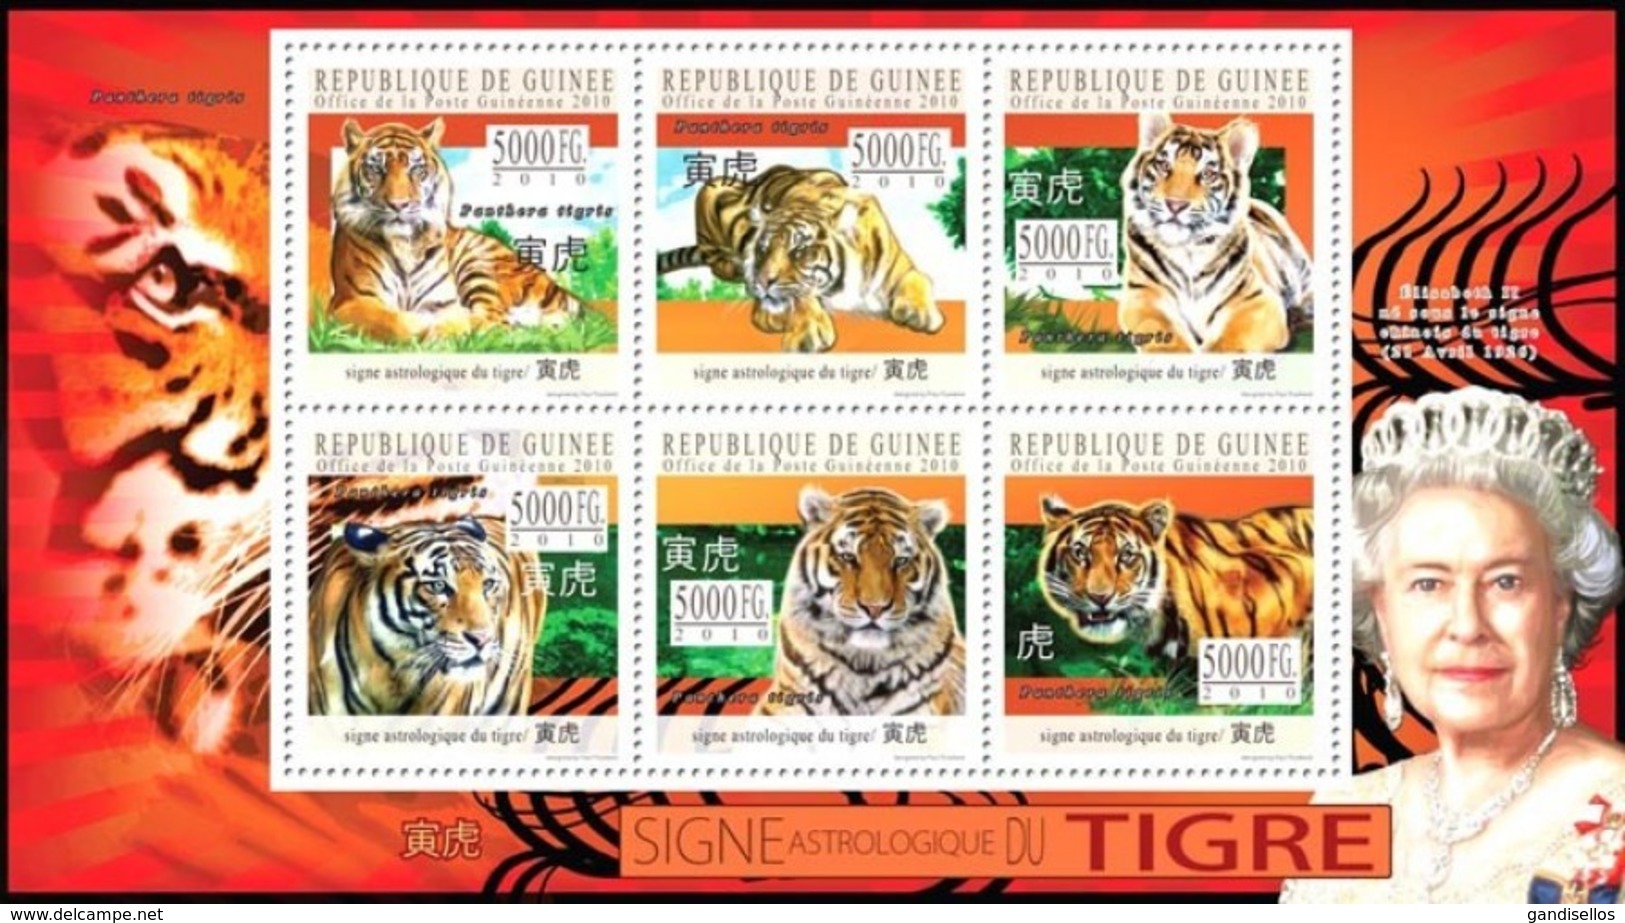 GUINEA 2010 SHEET ASTROLOGICAL SIGN OF THE TIGER SIGNE ASTROLOGIQUE CHINESE HOROSCOPE TIGRE WILD CATS WILDLIFE Gu10403a - Guinea (1958-...)